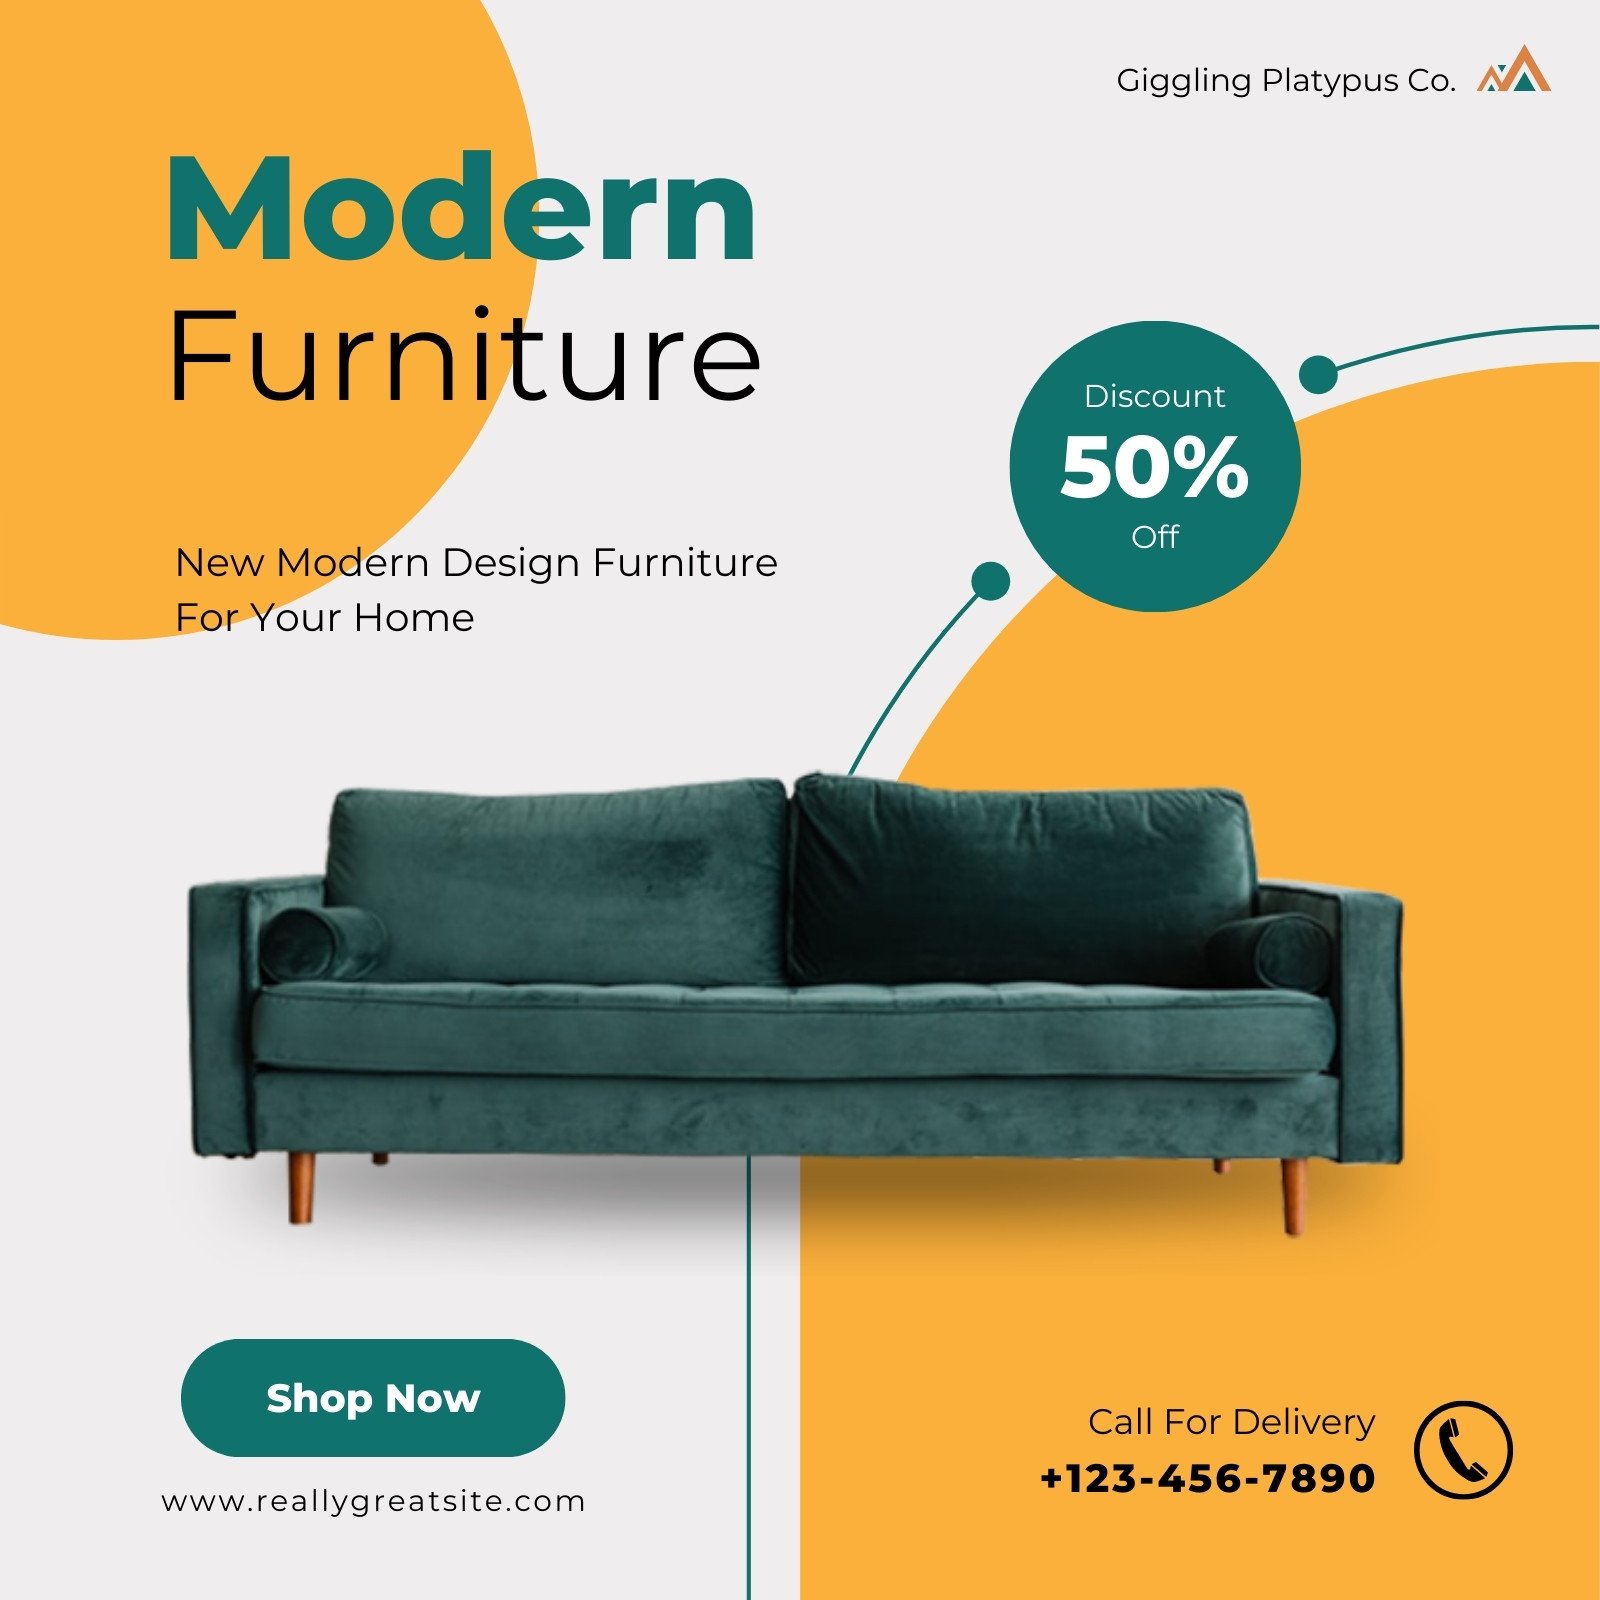 10 online furniture stores with free samples!